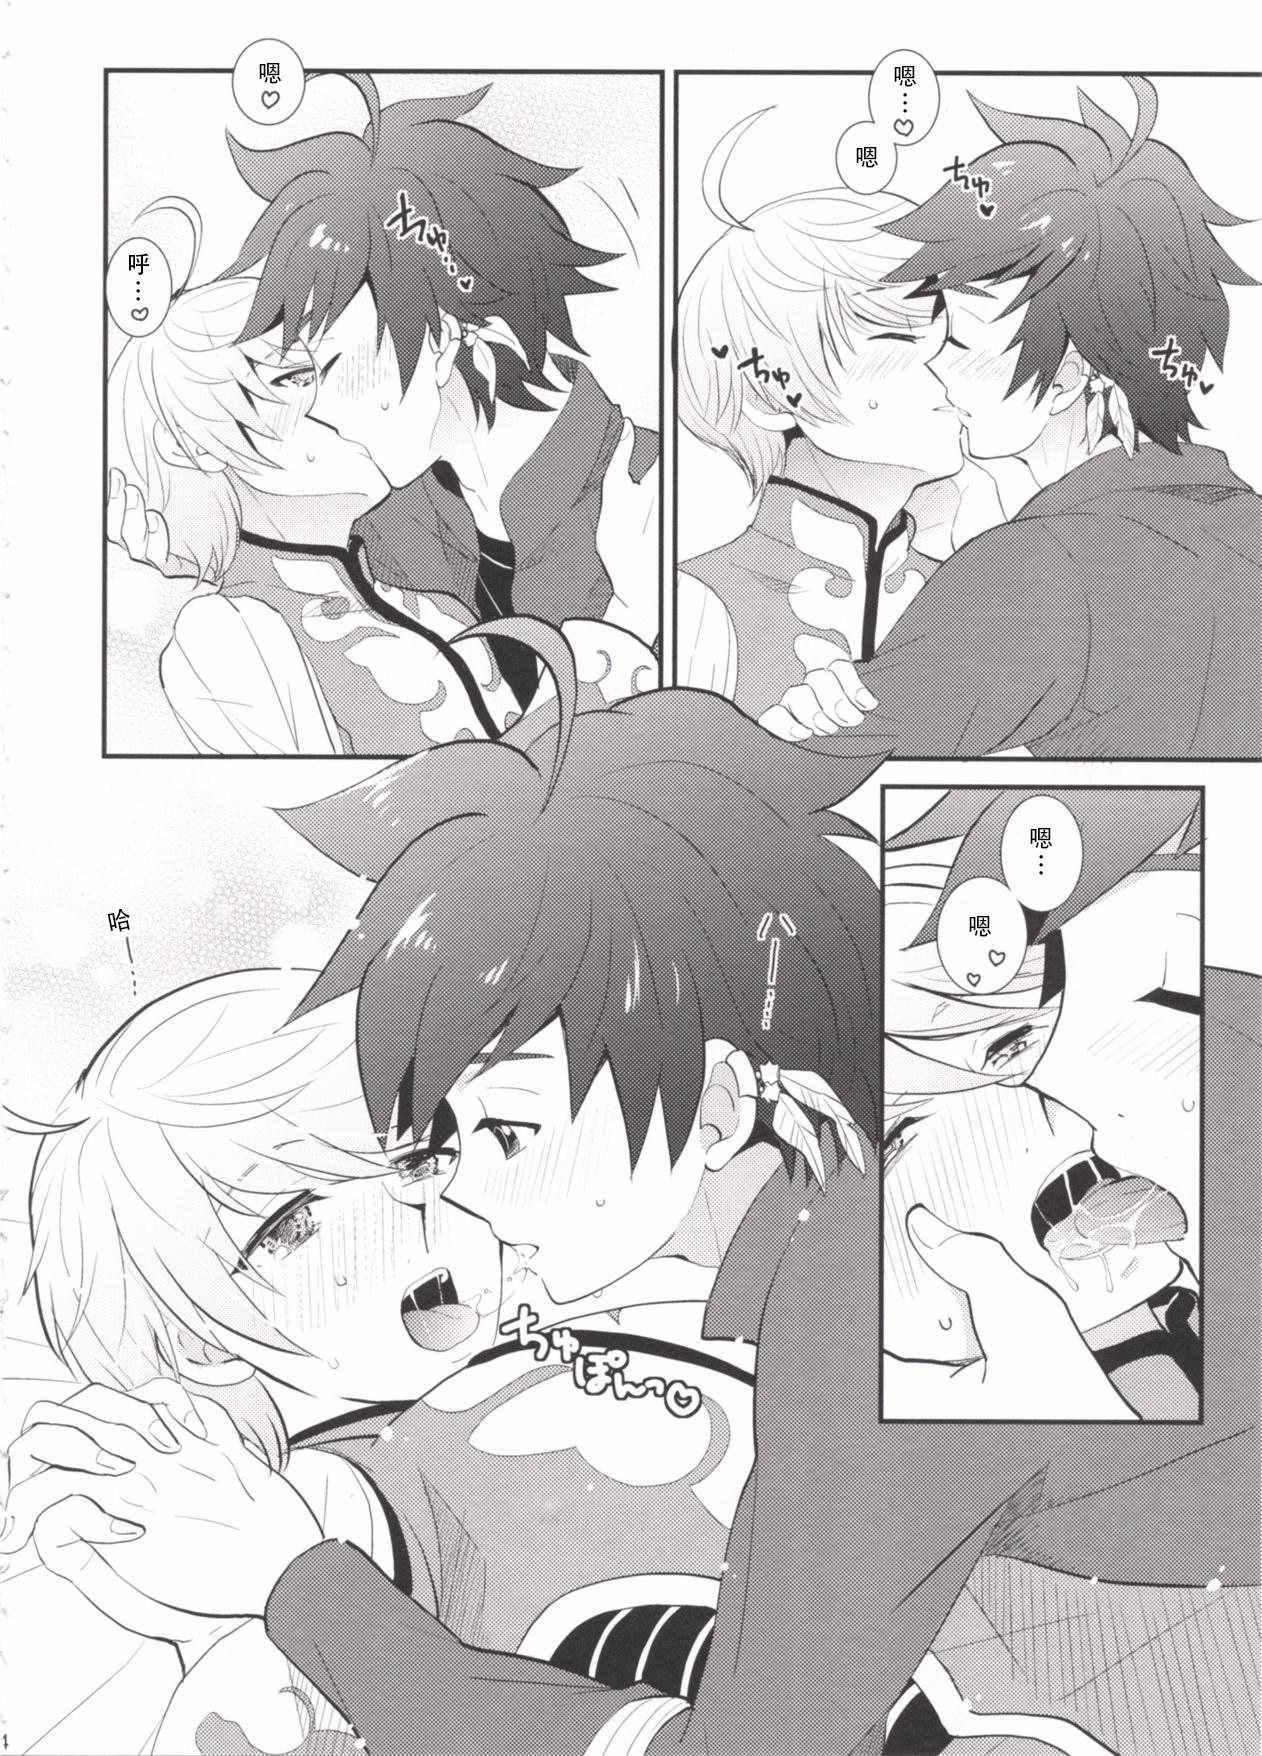 Squirters とろける体温 - Tales of zestiria Naughty - Page 3